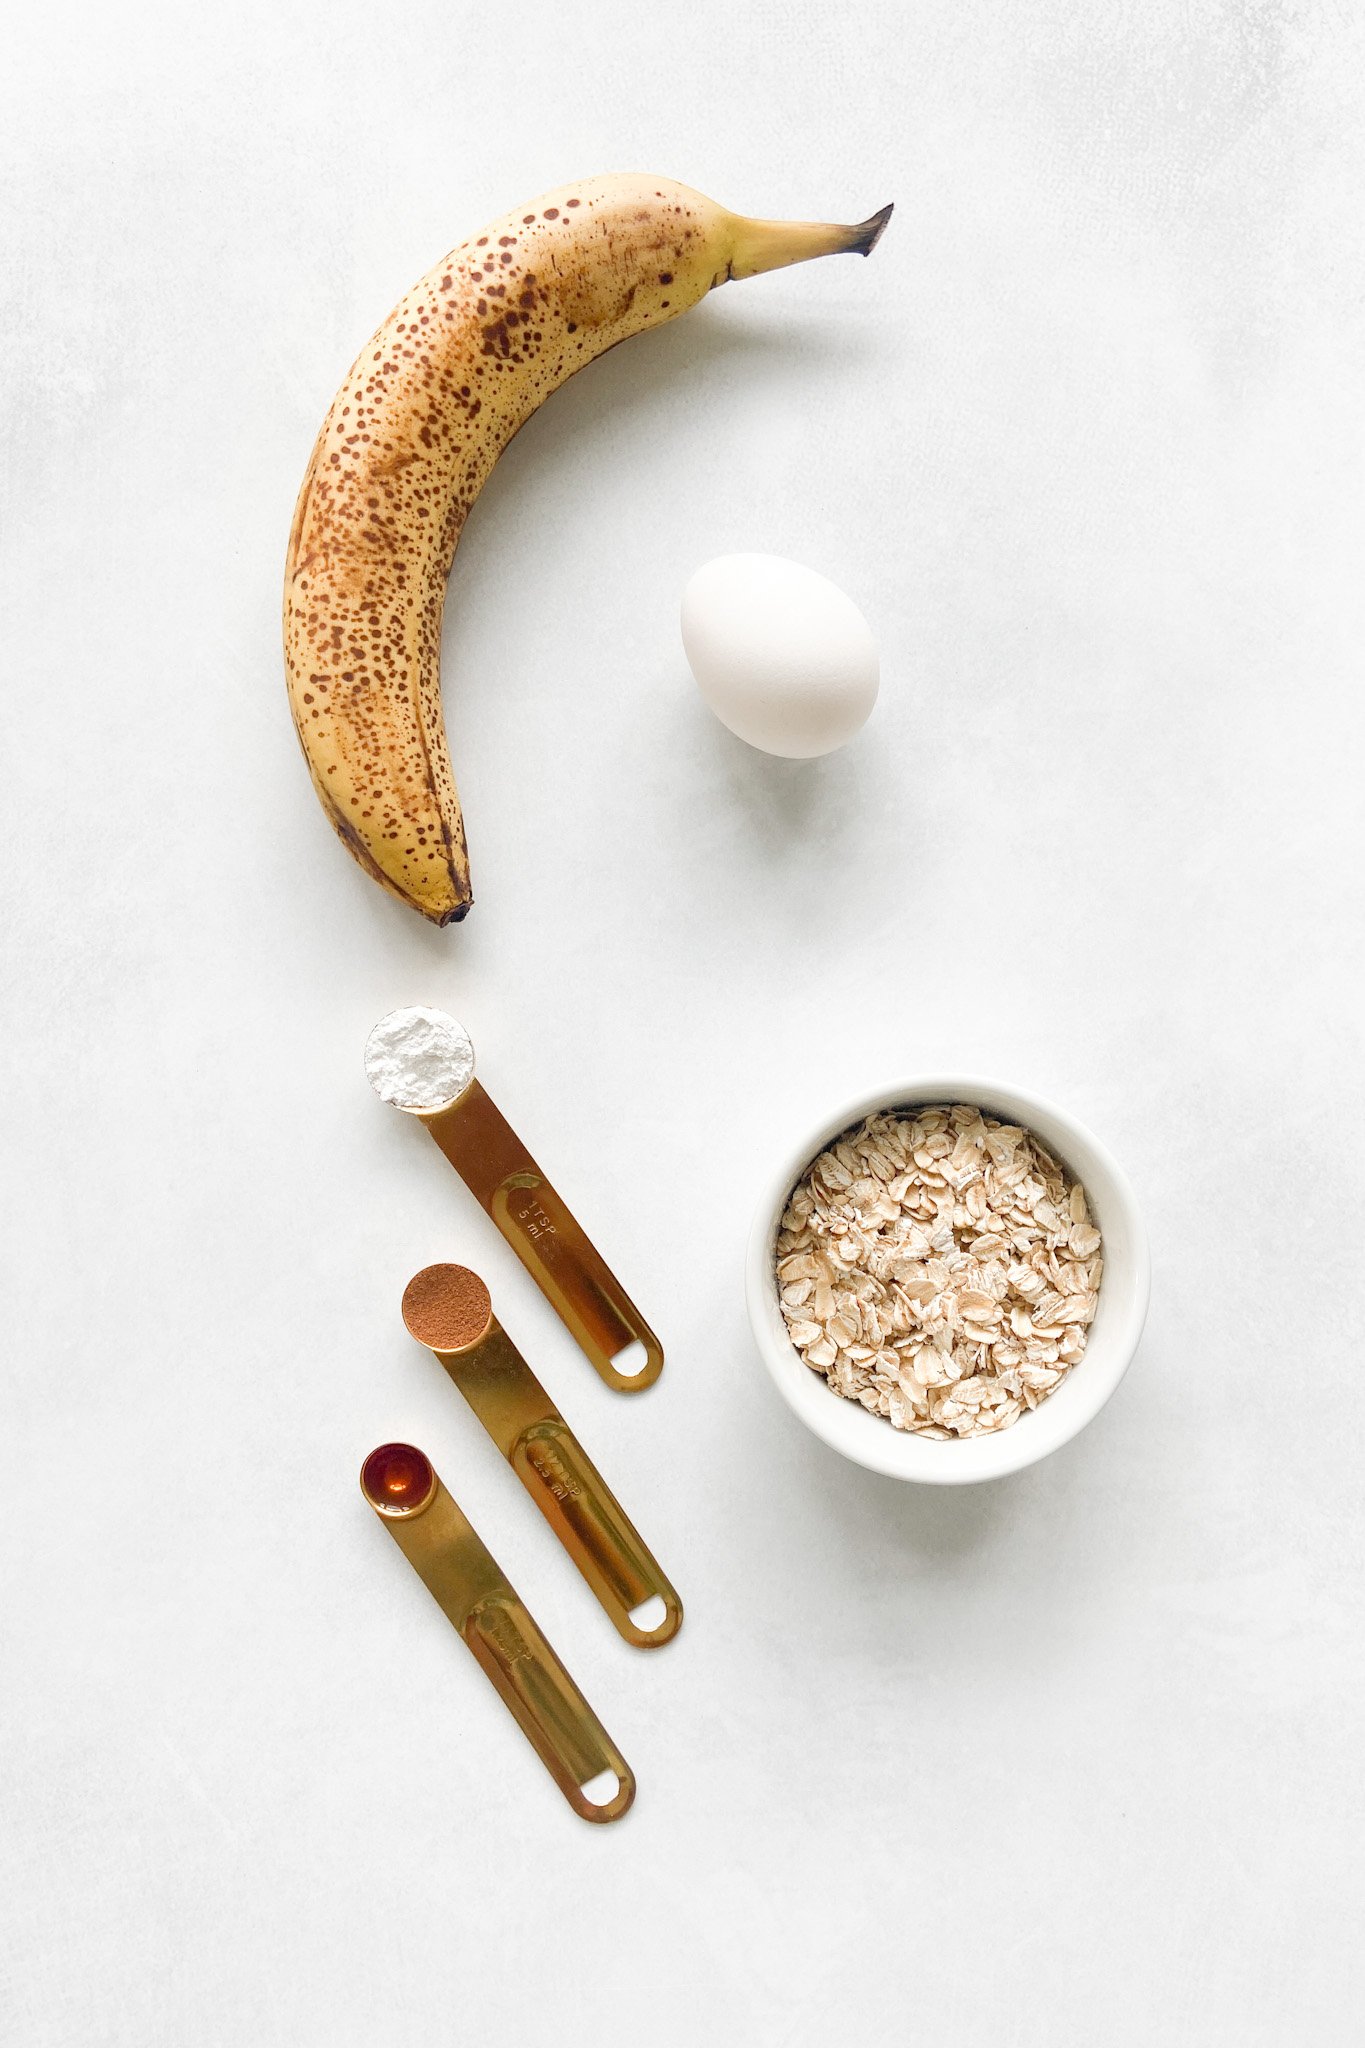 Ingredients to make oatmeal banana pancakes. Specifics provided in recipe card.